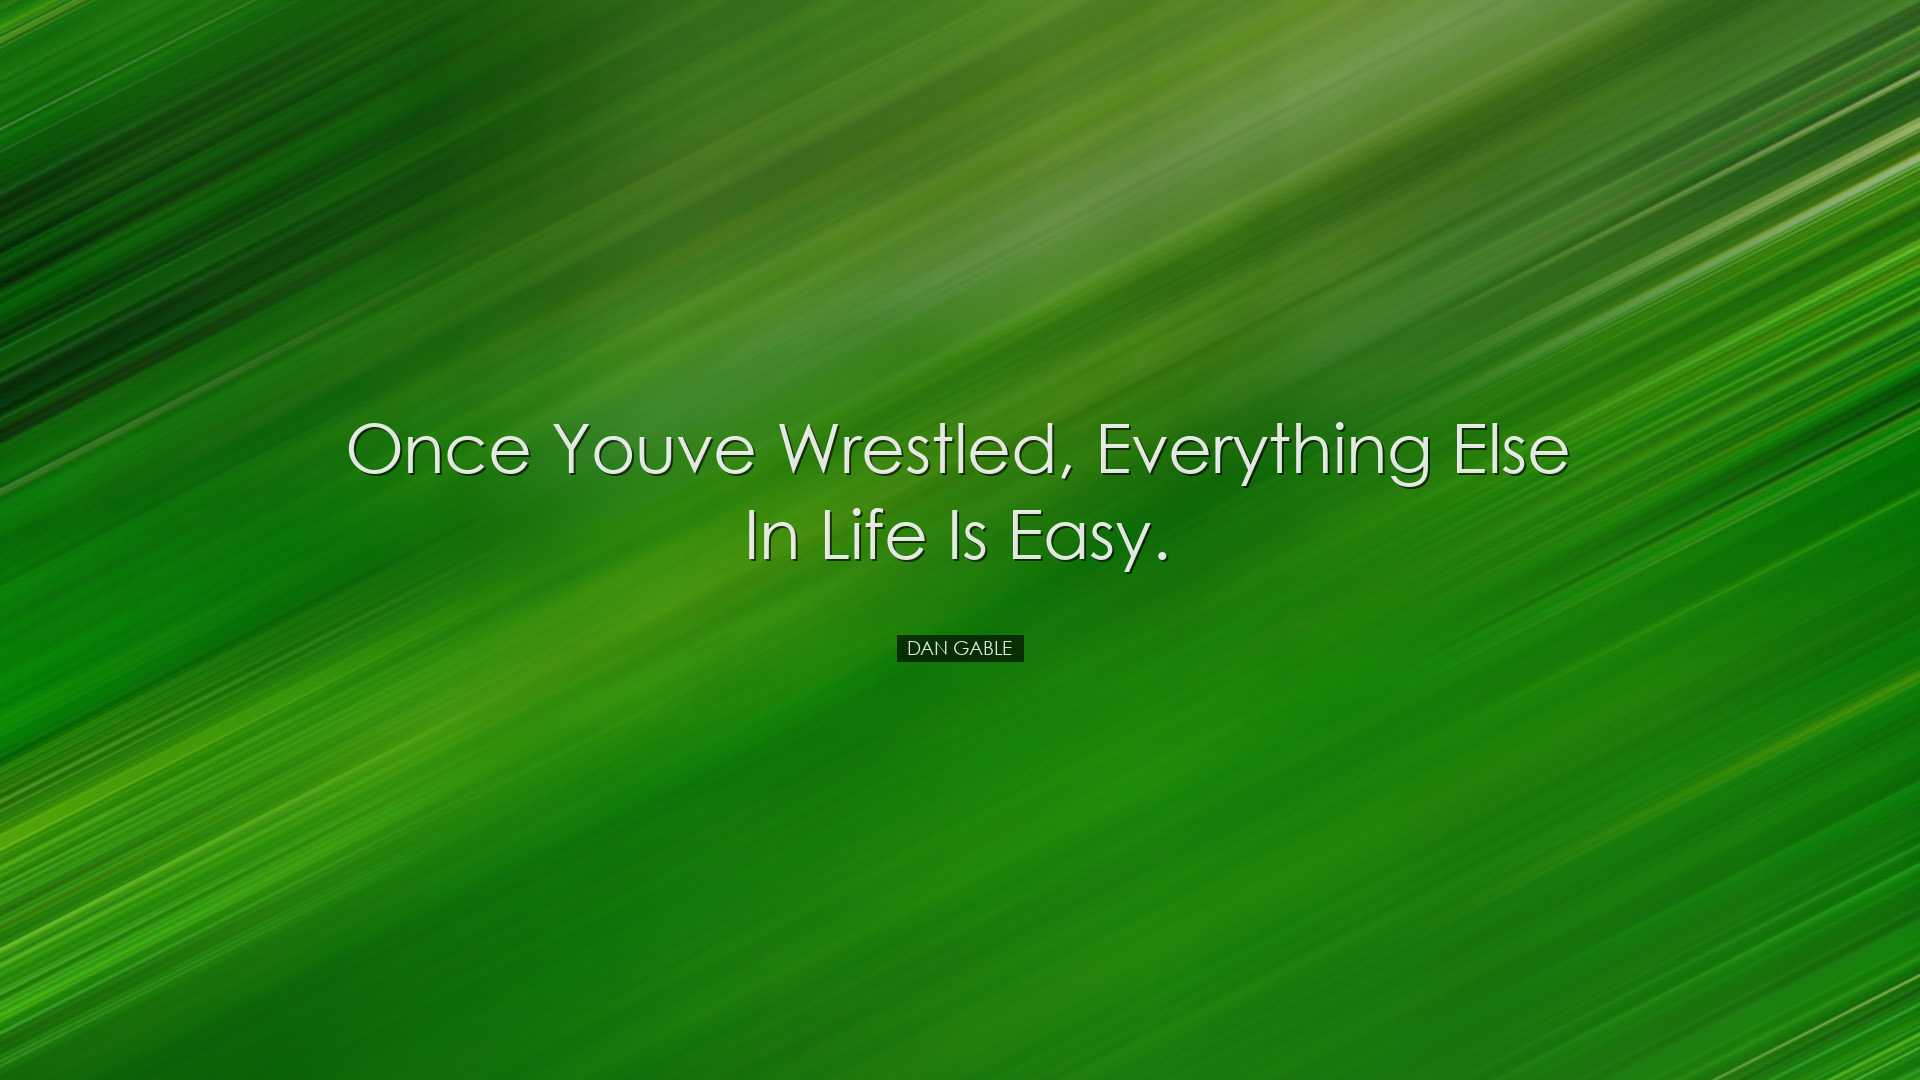 Once youve wrestled, everything else in life is easy. - Dan Gable